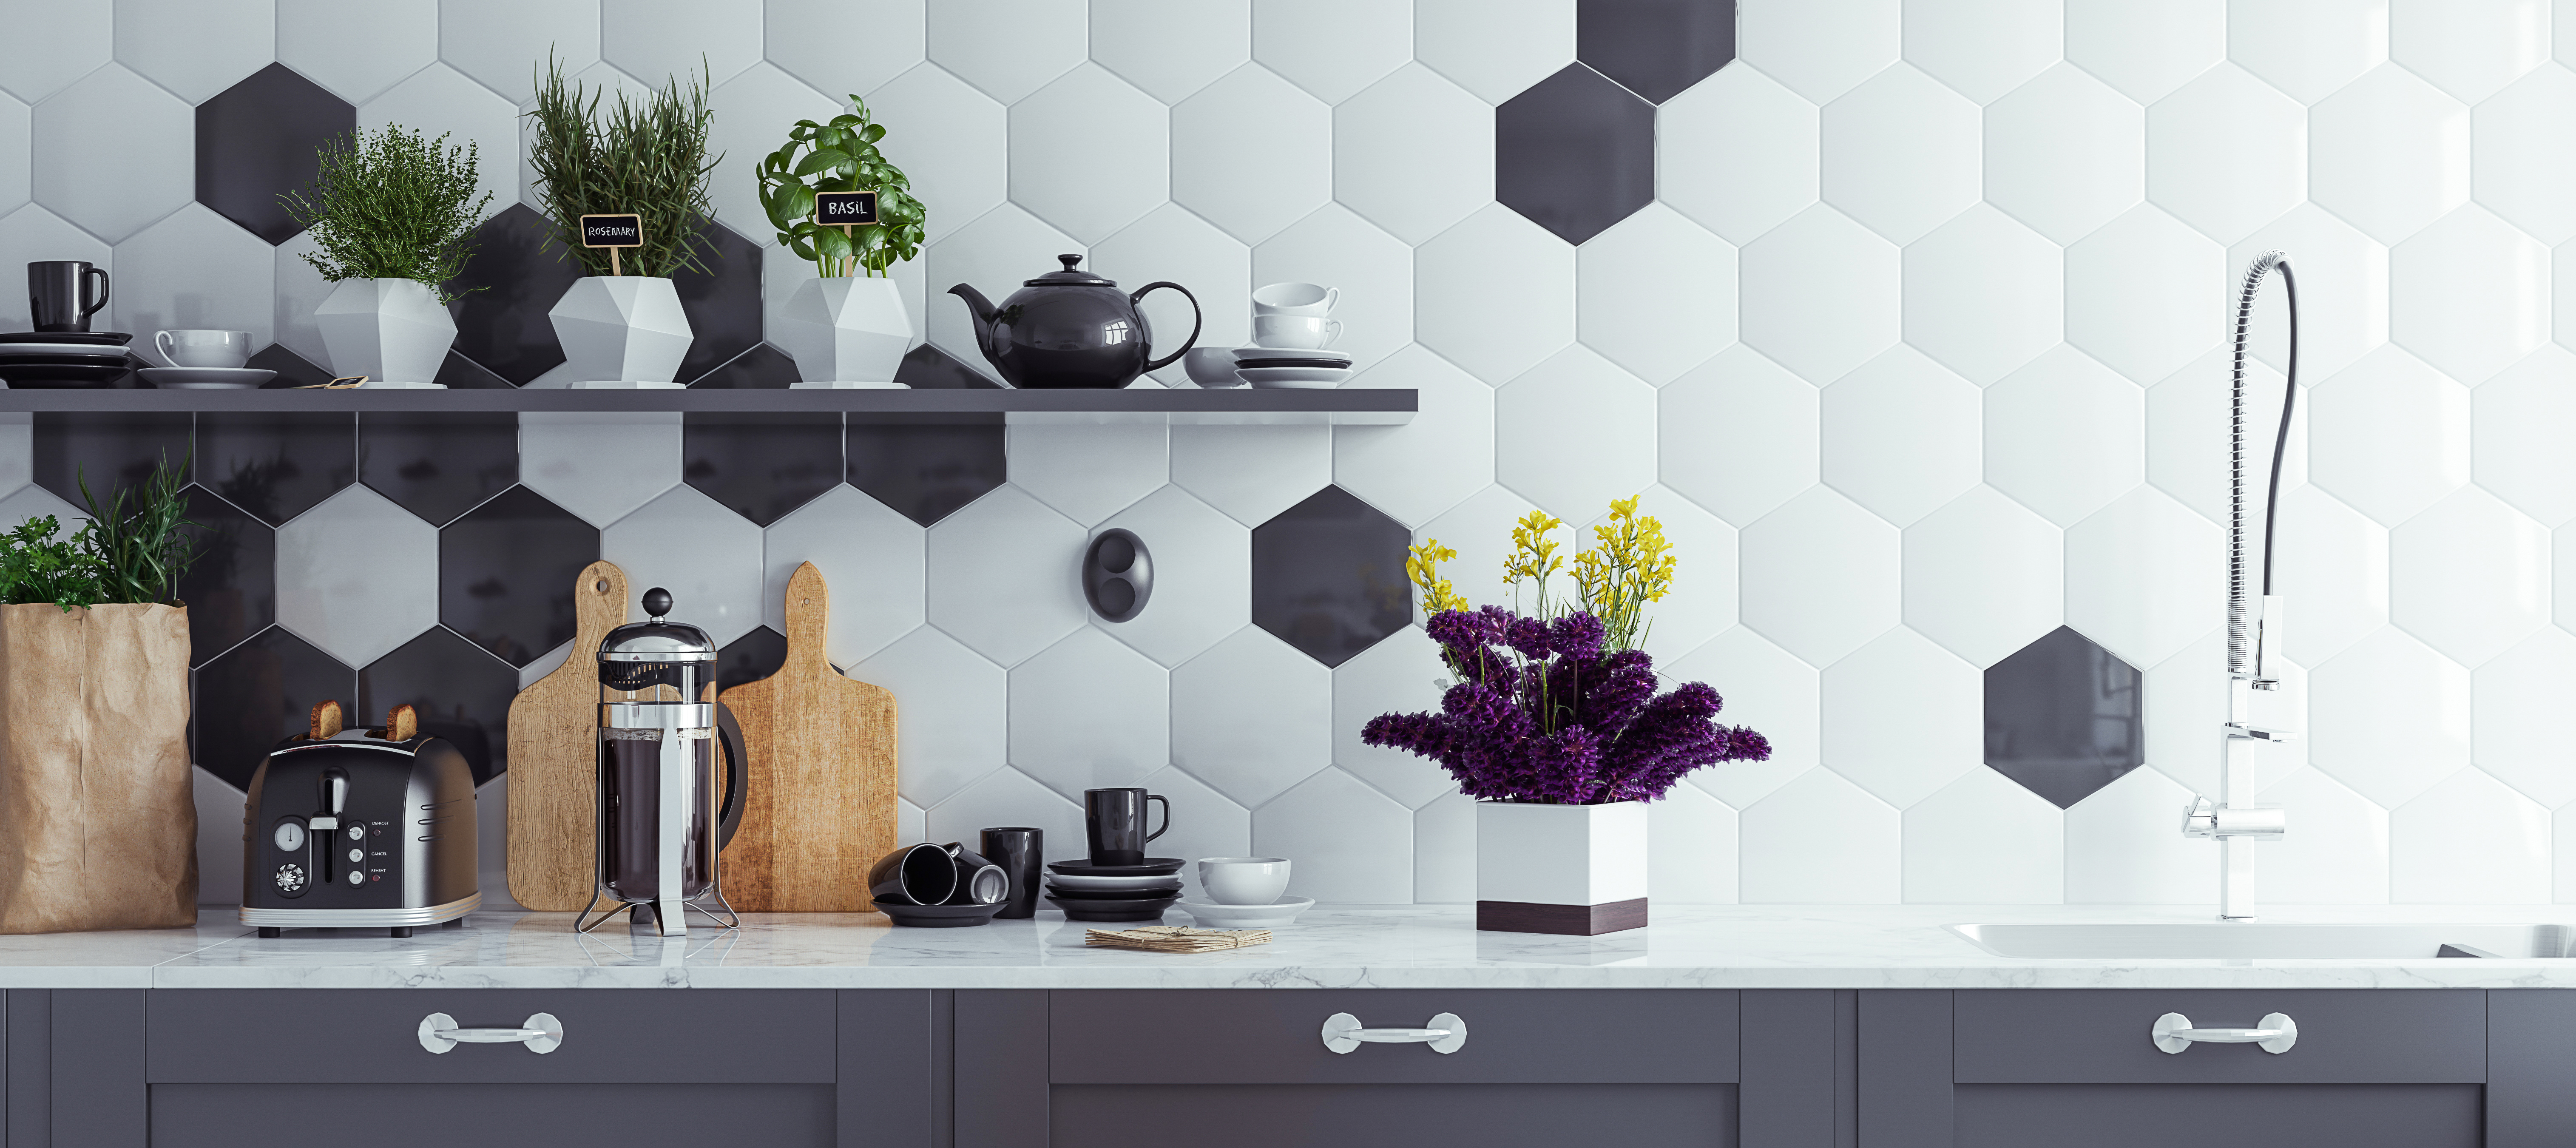 18 Kitchen Tile Ideas To Transform Your Home For Summer   Interior ...